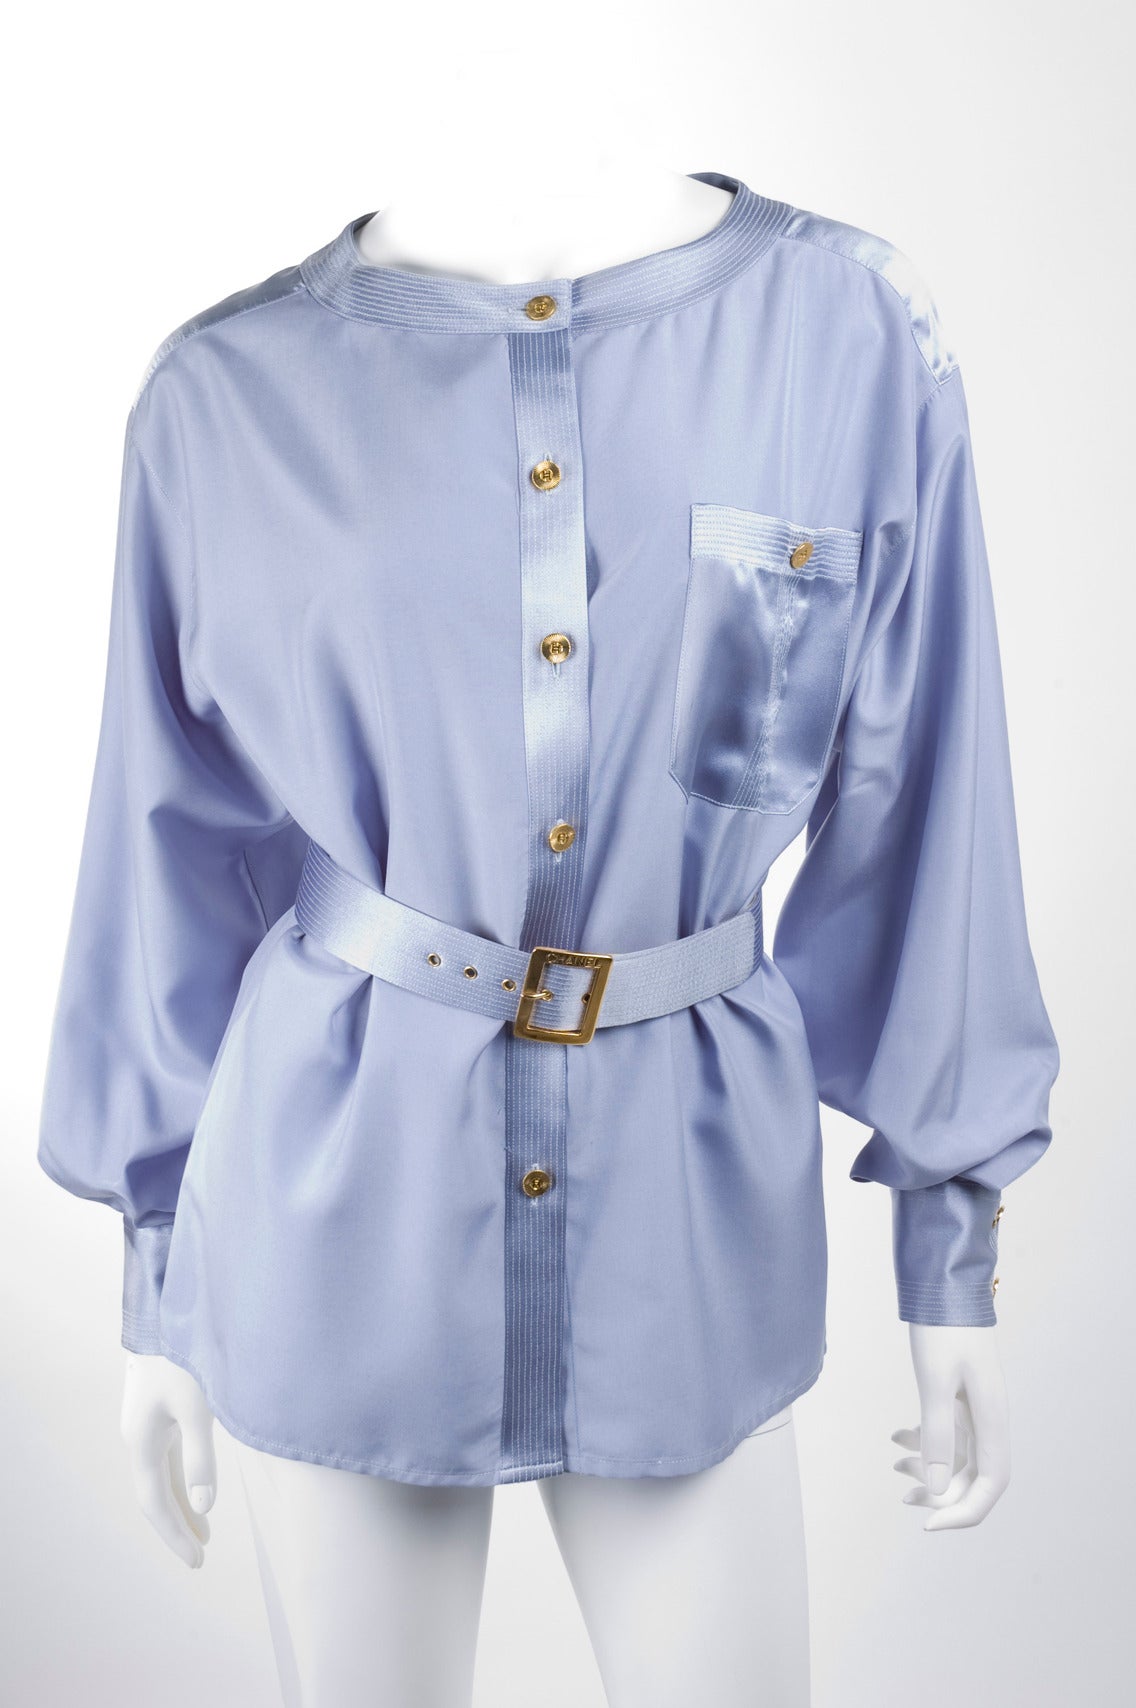 Vintage Chanel silk blouse with belt.
Silk in Sky blue with matching belt with gold buckle.
CC Gold buttons.
Excellent condition.
Size label is missing about EU 38 - 6 US
Measurements:
Length 63.5 cm - 25.5